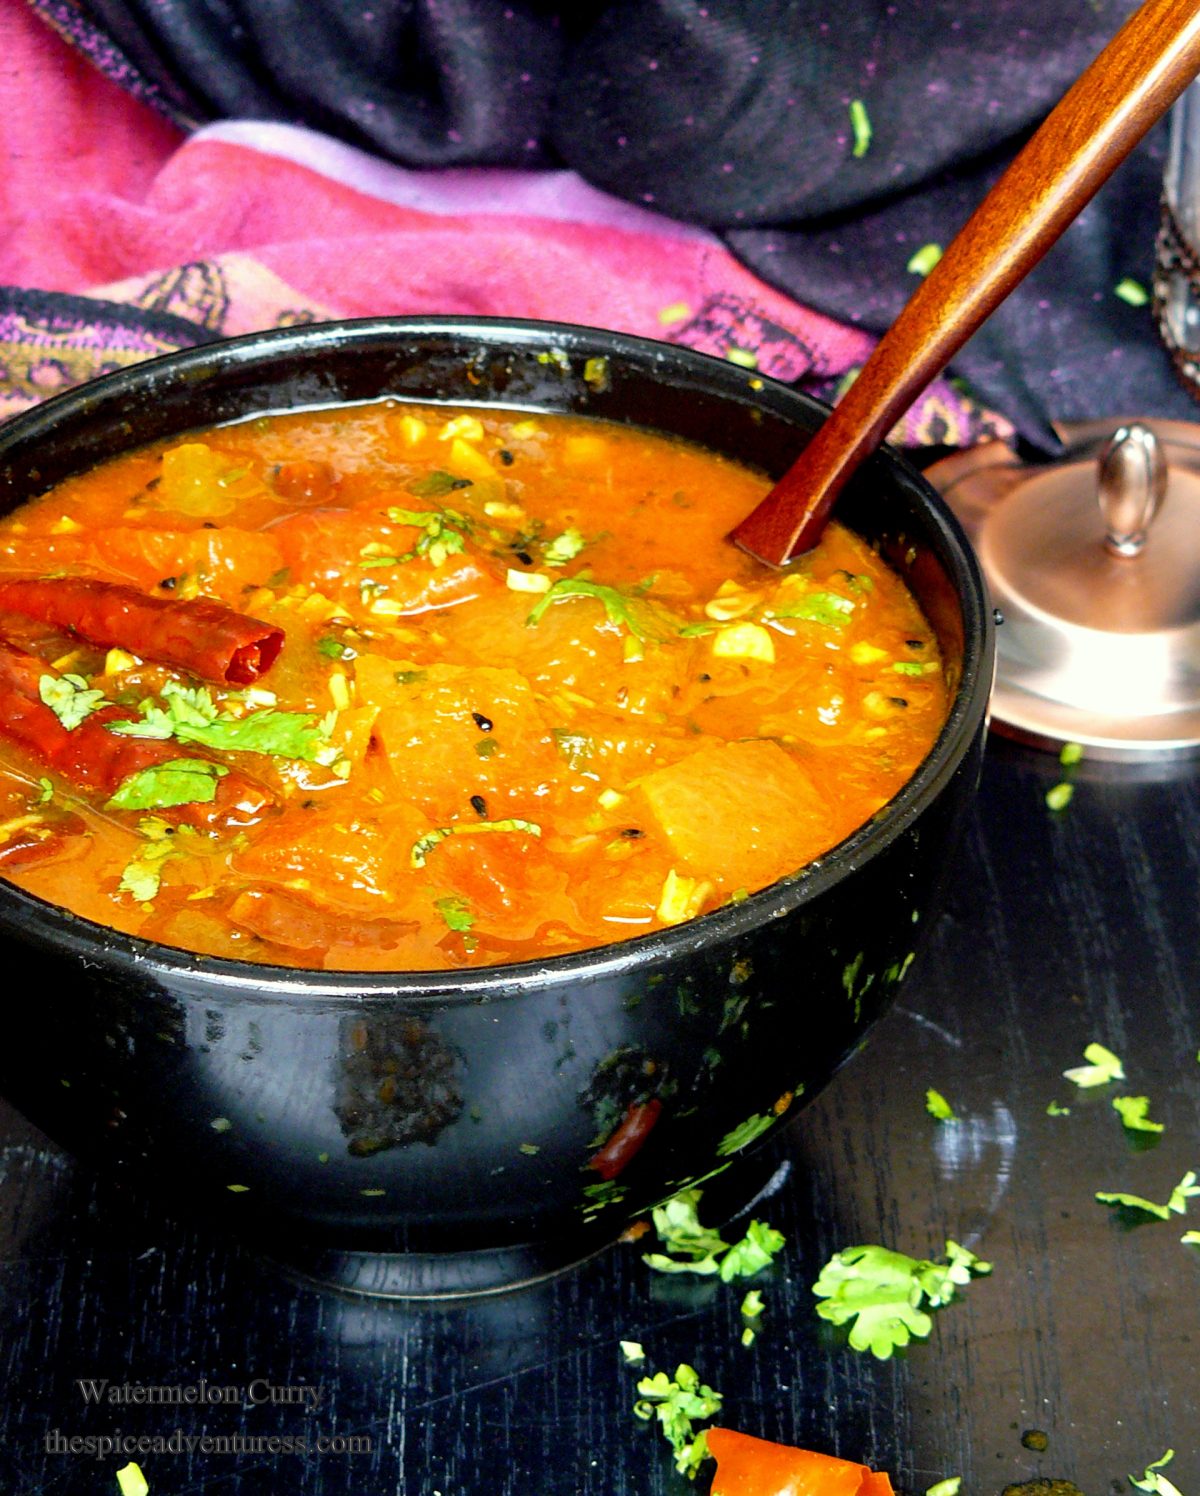 Watermelon Curry - a mildly spiced aromatic curry with watermelon rind and flesh - thespiceadventuress.com